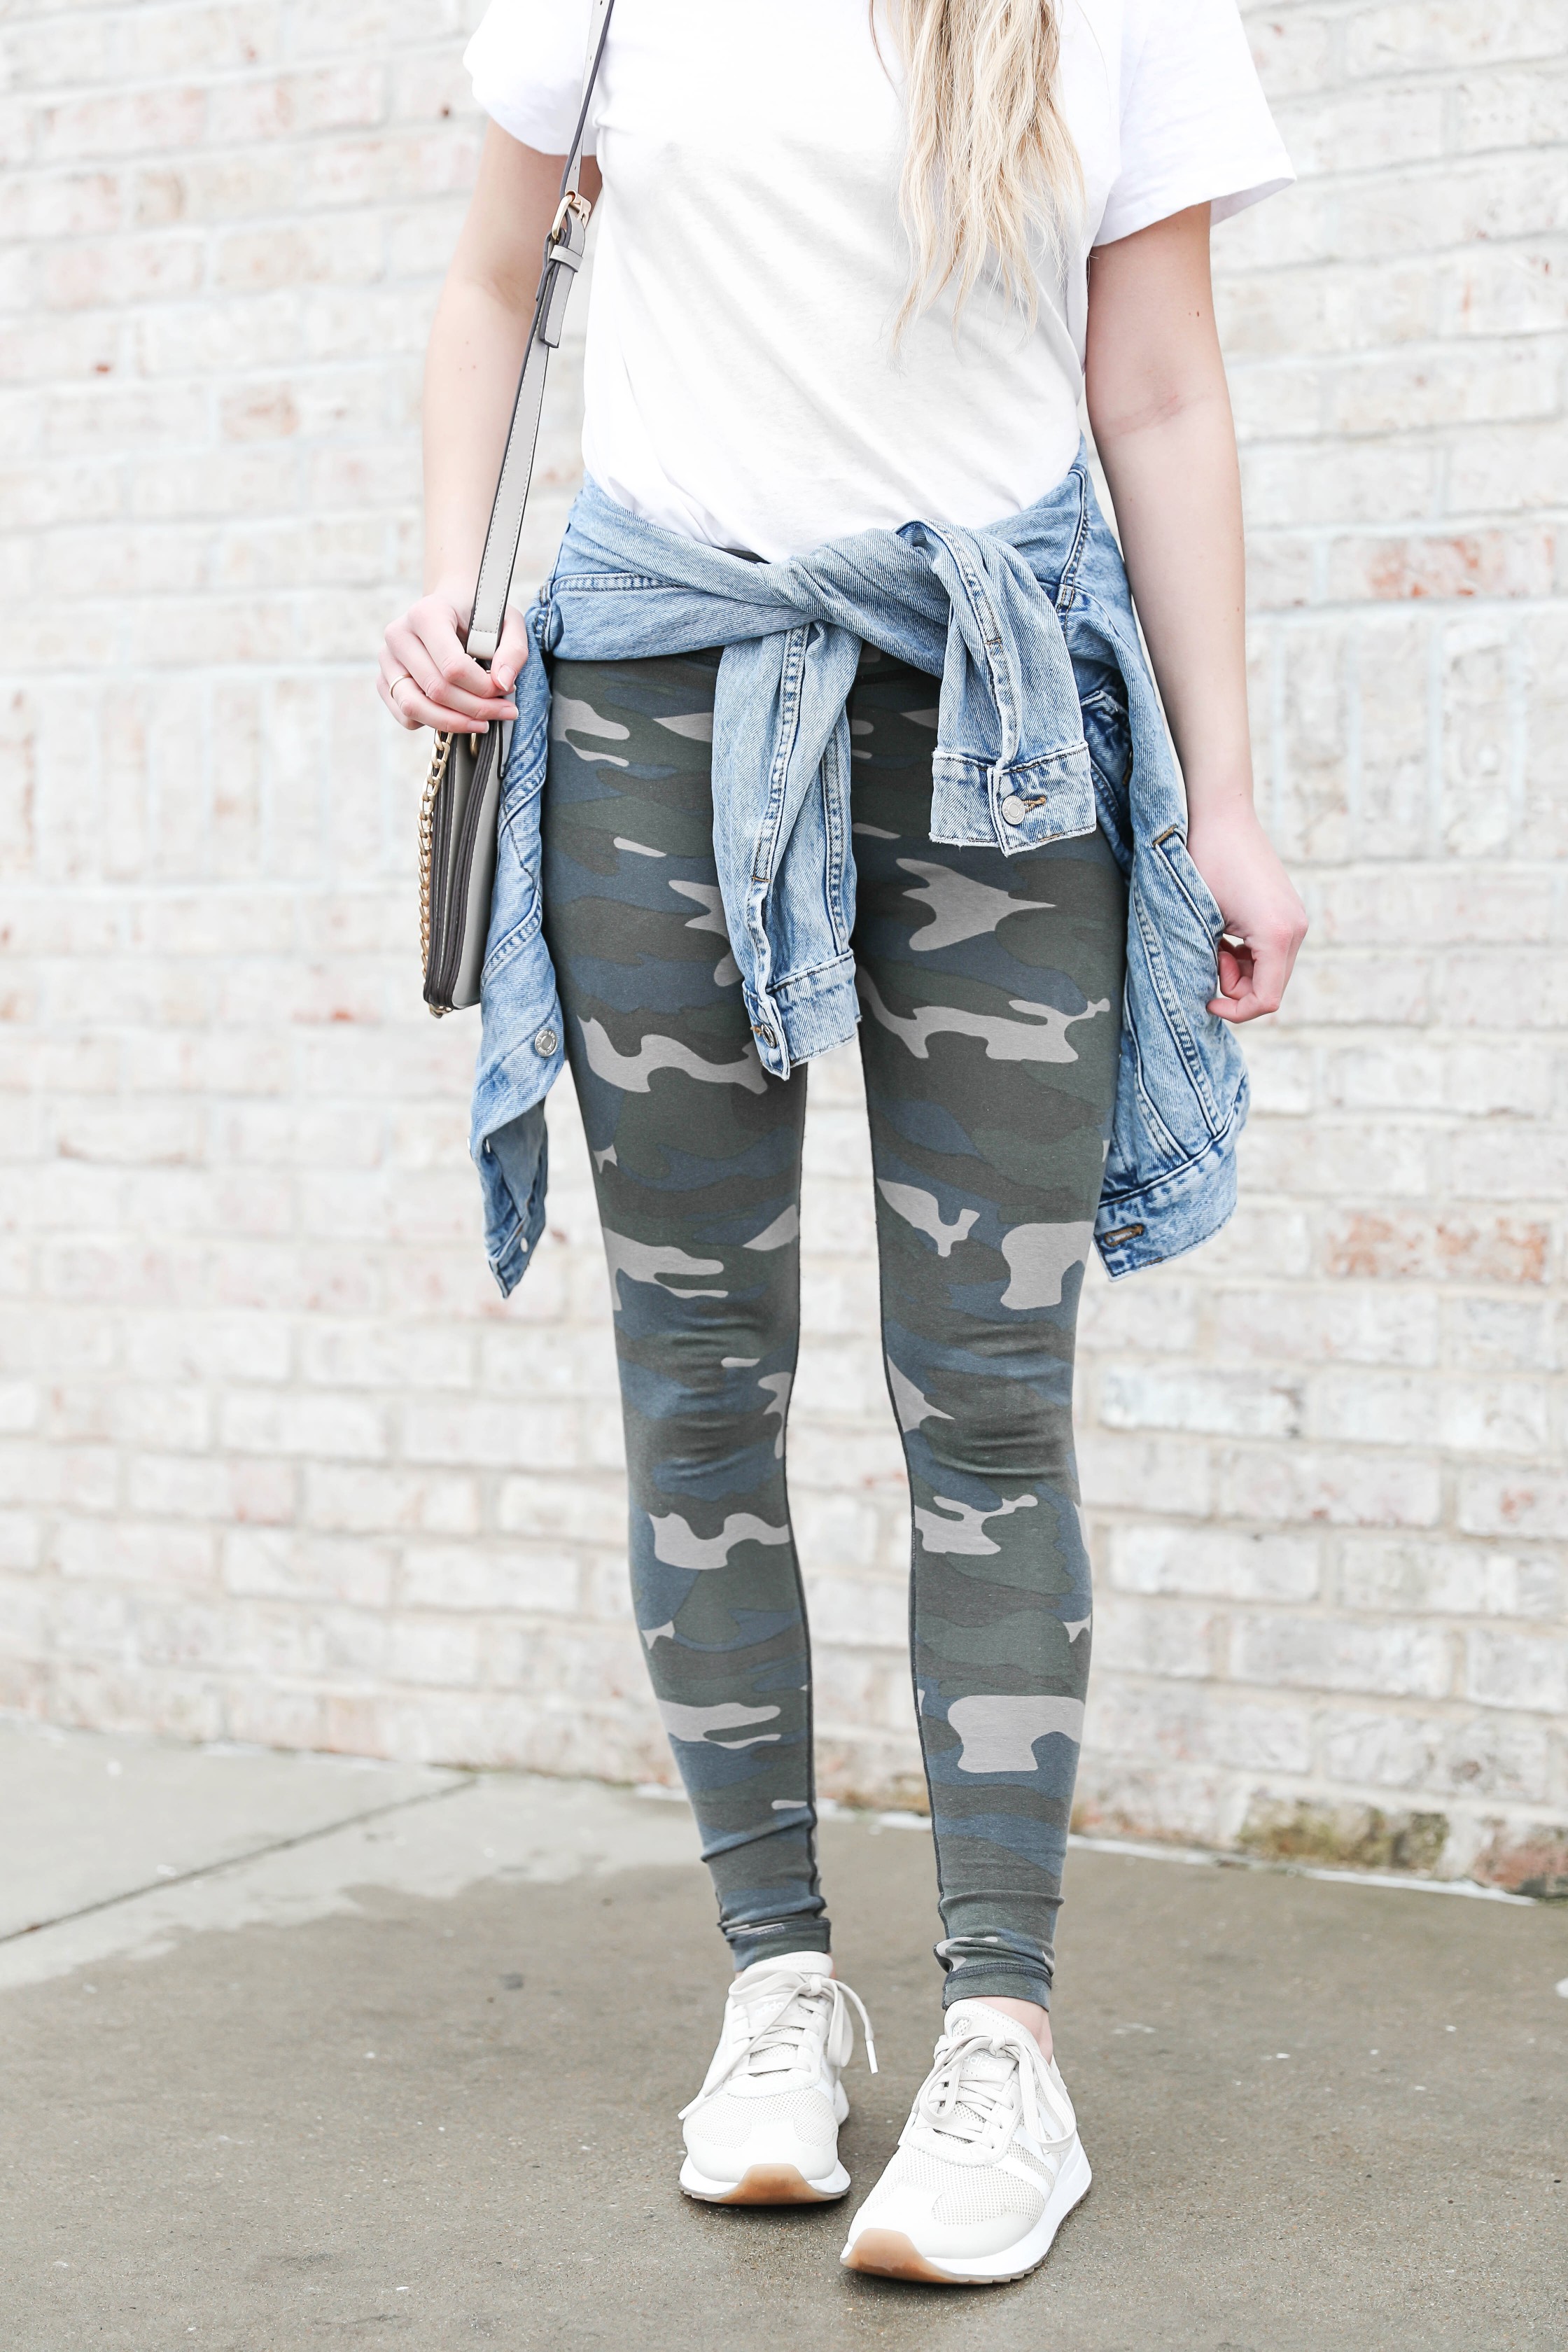 Glam Camo - Twenties Girl Style | Outfits with leggings, Cute spring outfits,  Camo fashion